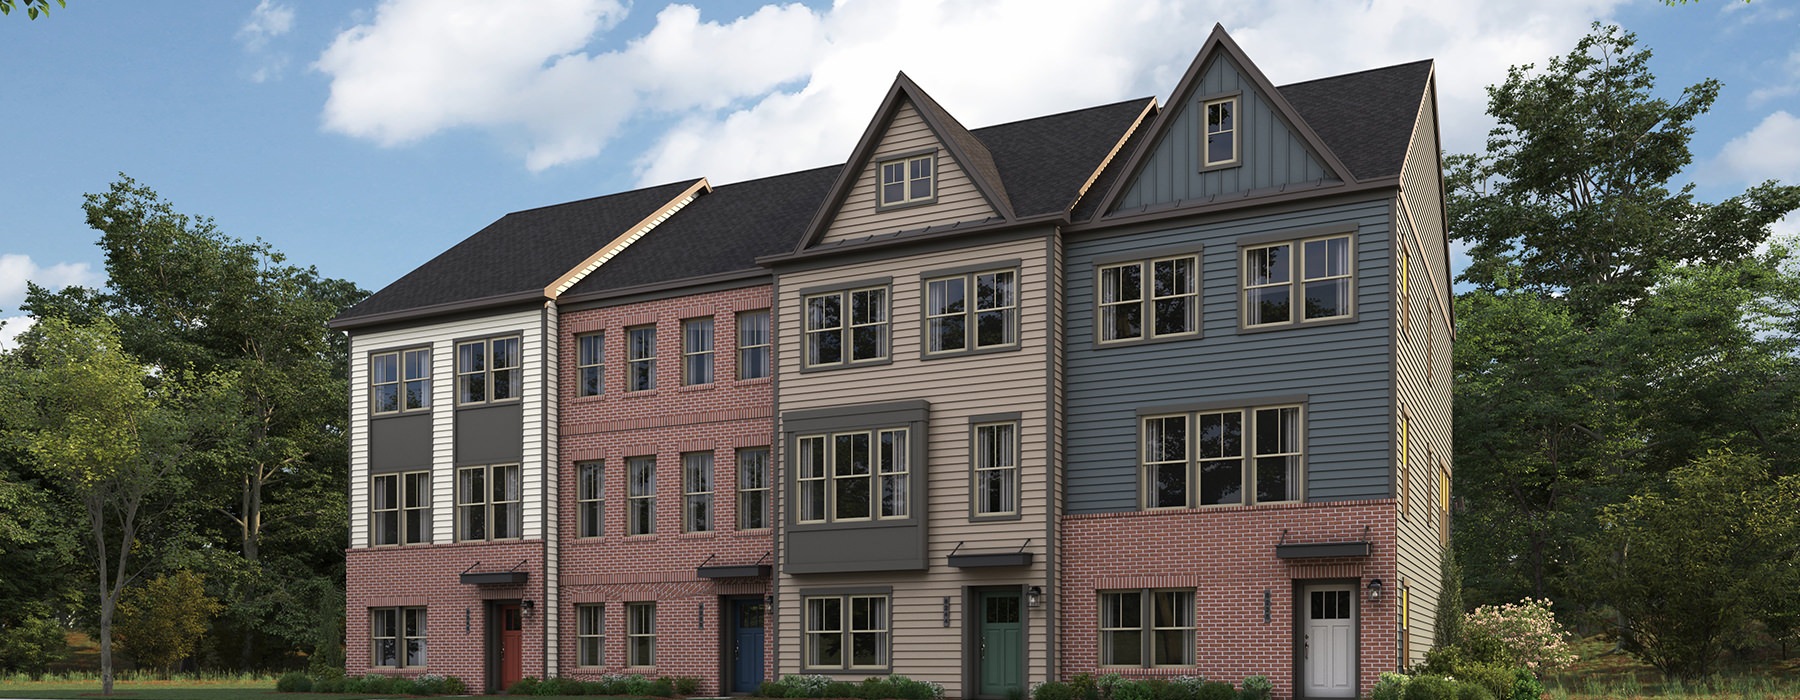 rendering of townhomes